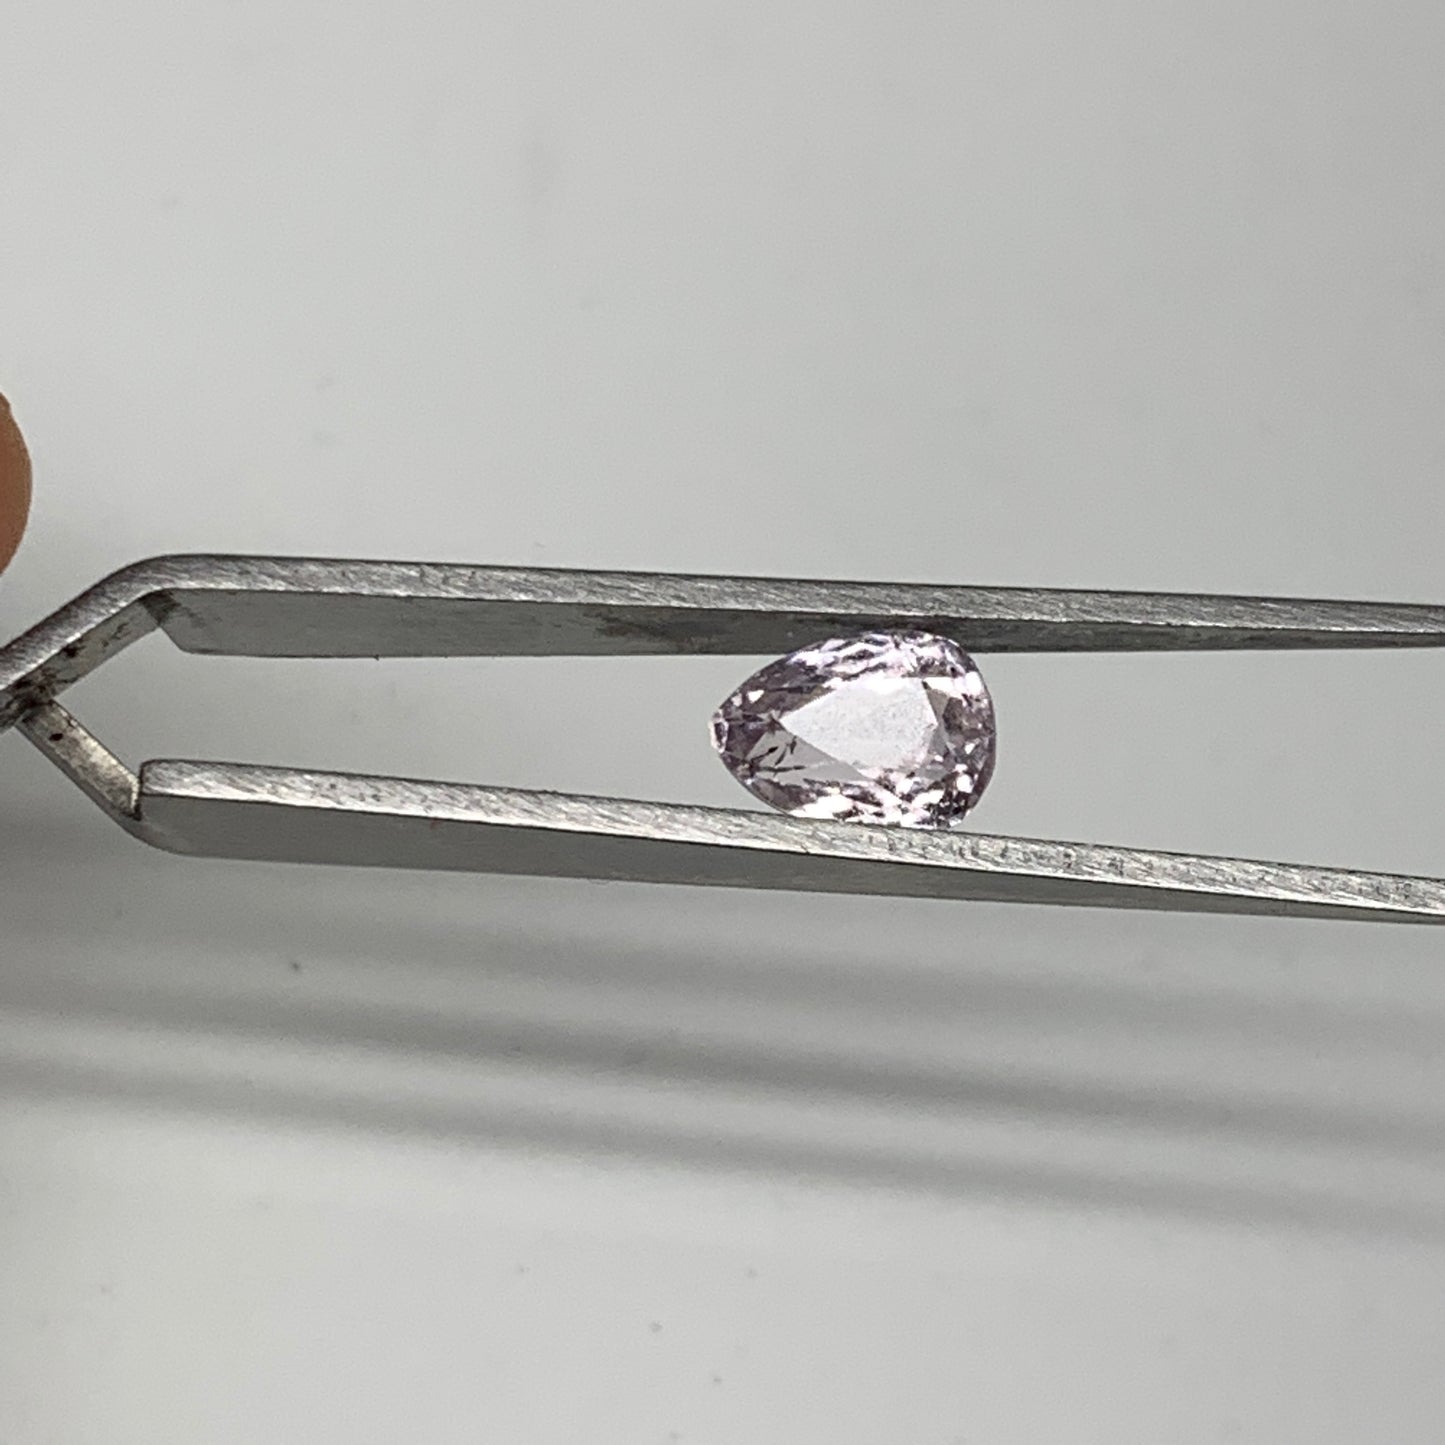 2.79cts, 9mmx6mmx5mm, Kunzite Crystal Facetted Cut Stone @Afghanistan, CTS46